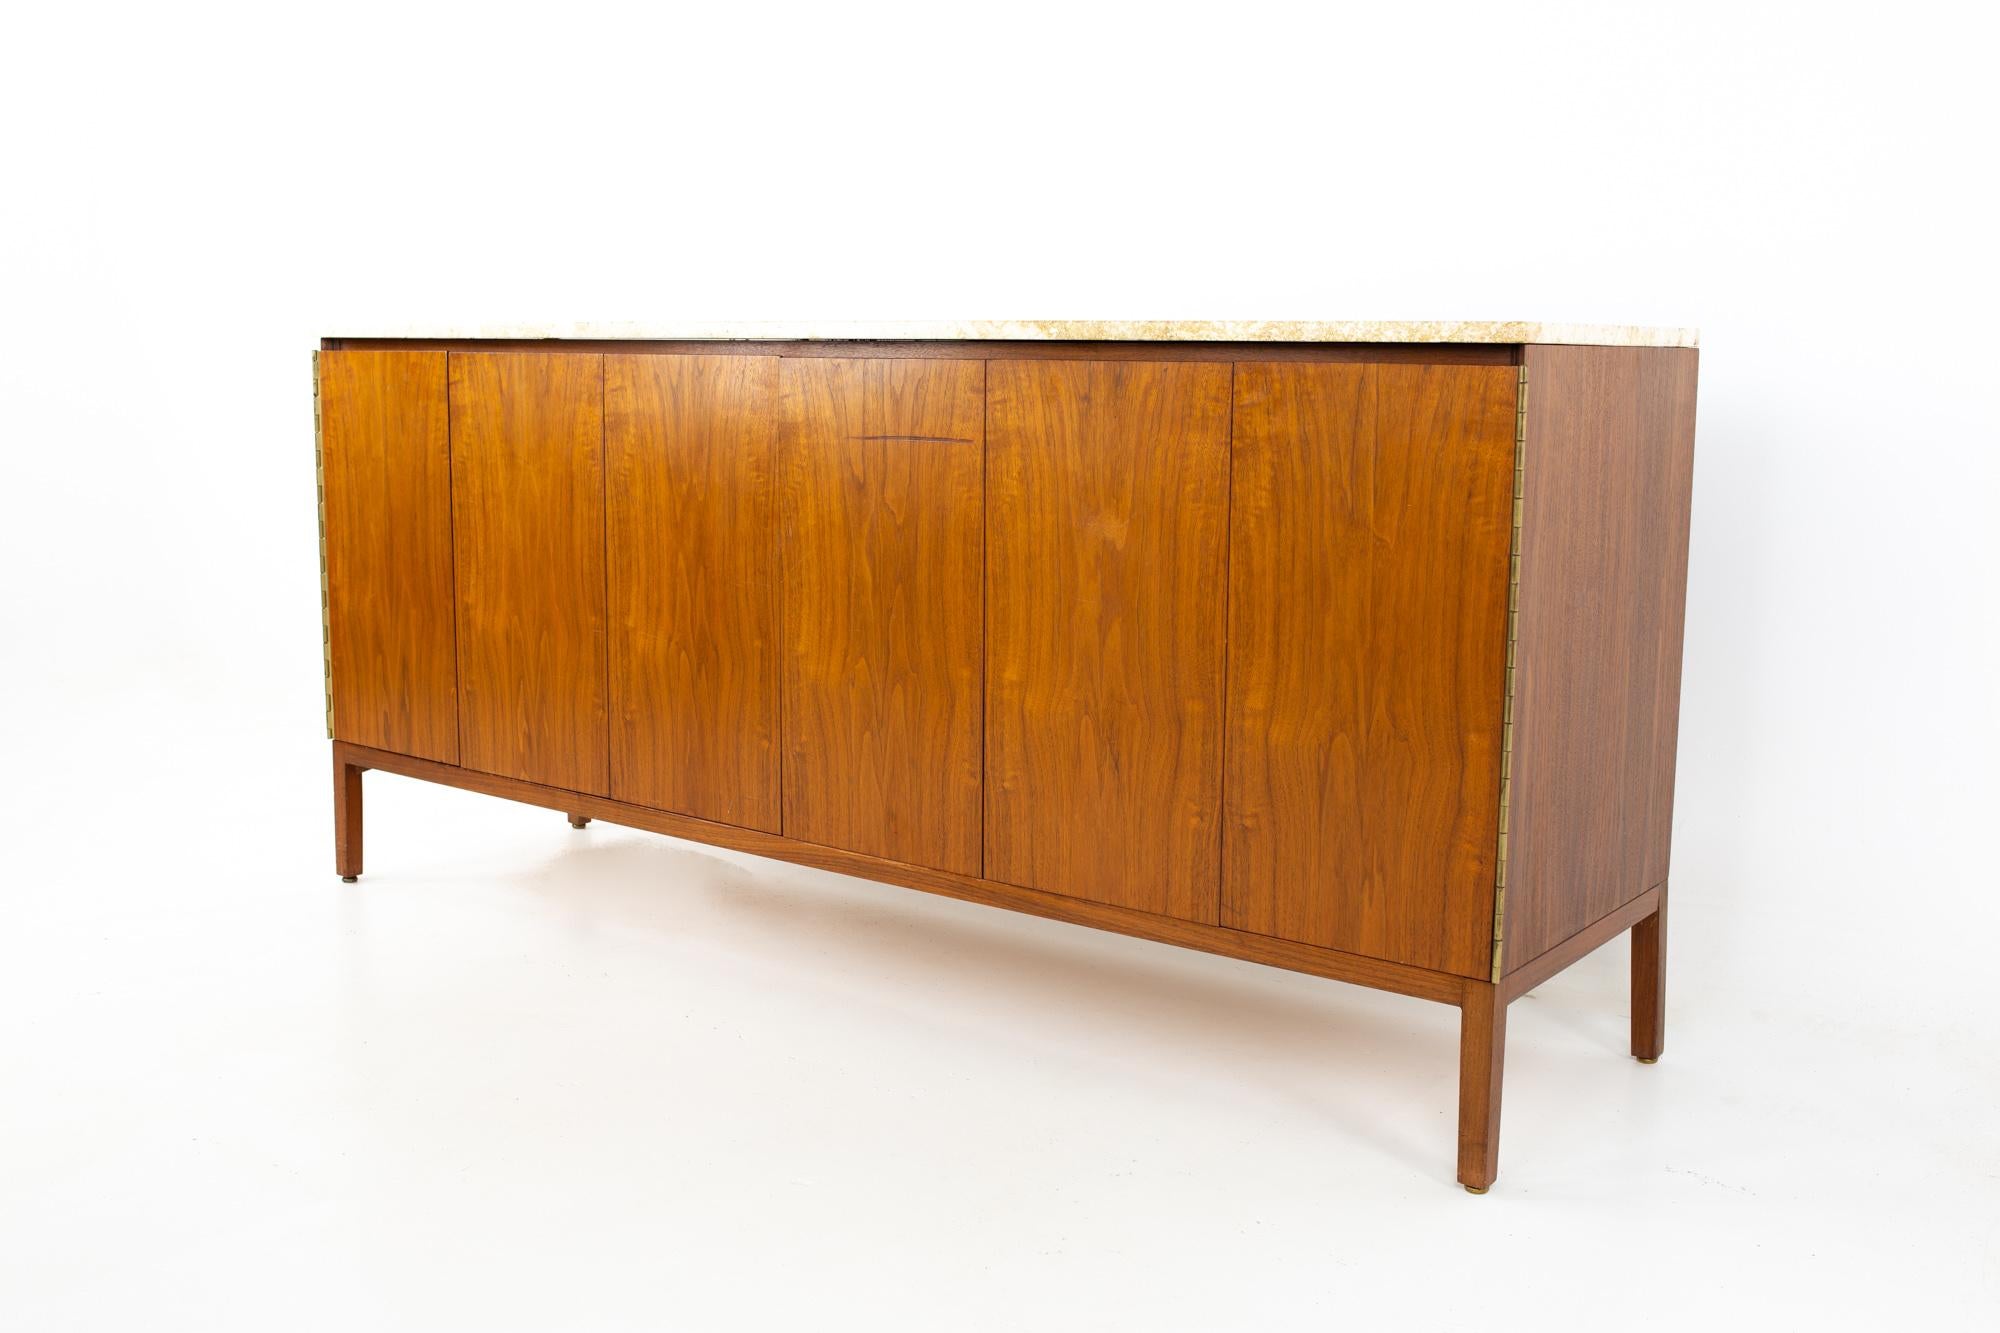 Paul McCobb for Calvin mid century walnut and Travertine marble top sideboard buffet credenza
Credenza measures: 71 wide x 19 deep x 31.25 inches high

All pieces of furniture can be had in what we call restored vintage condition. That means the